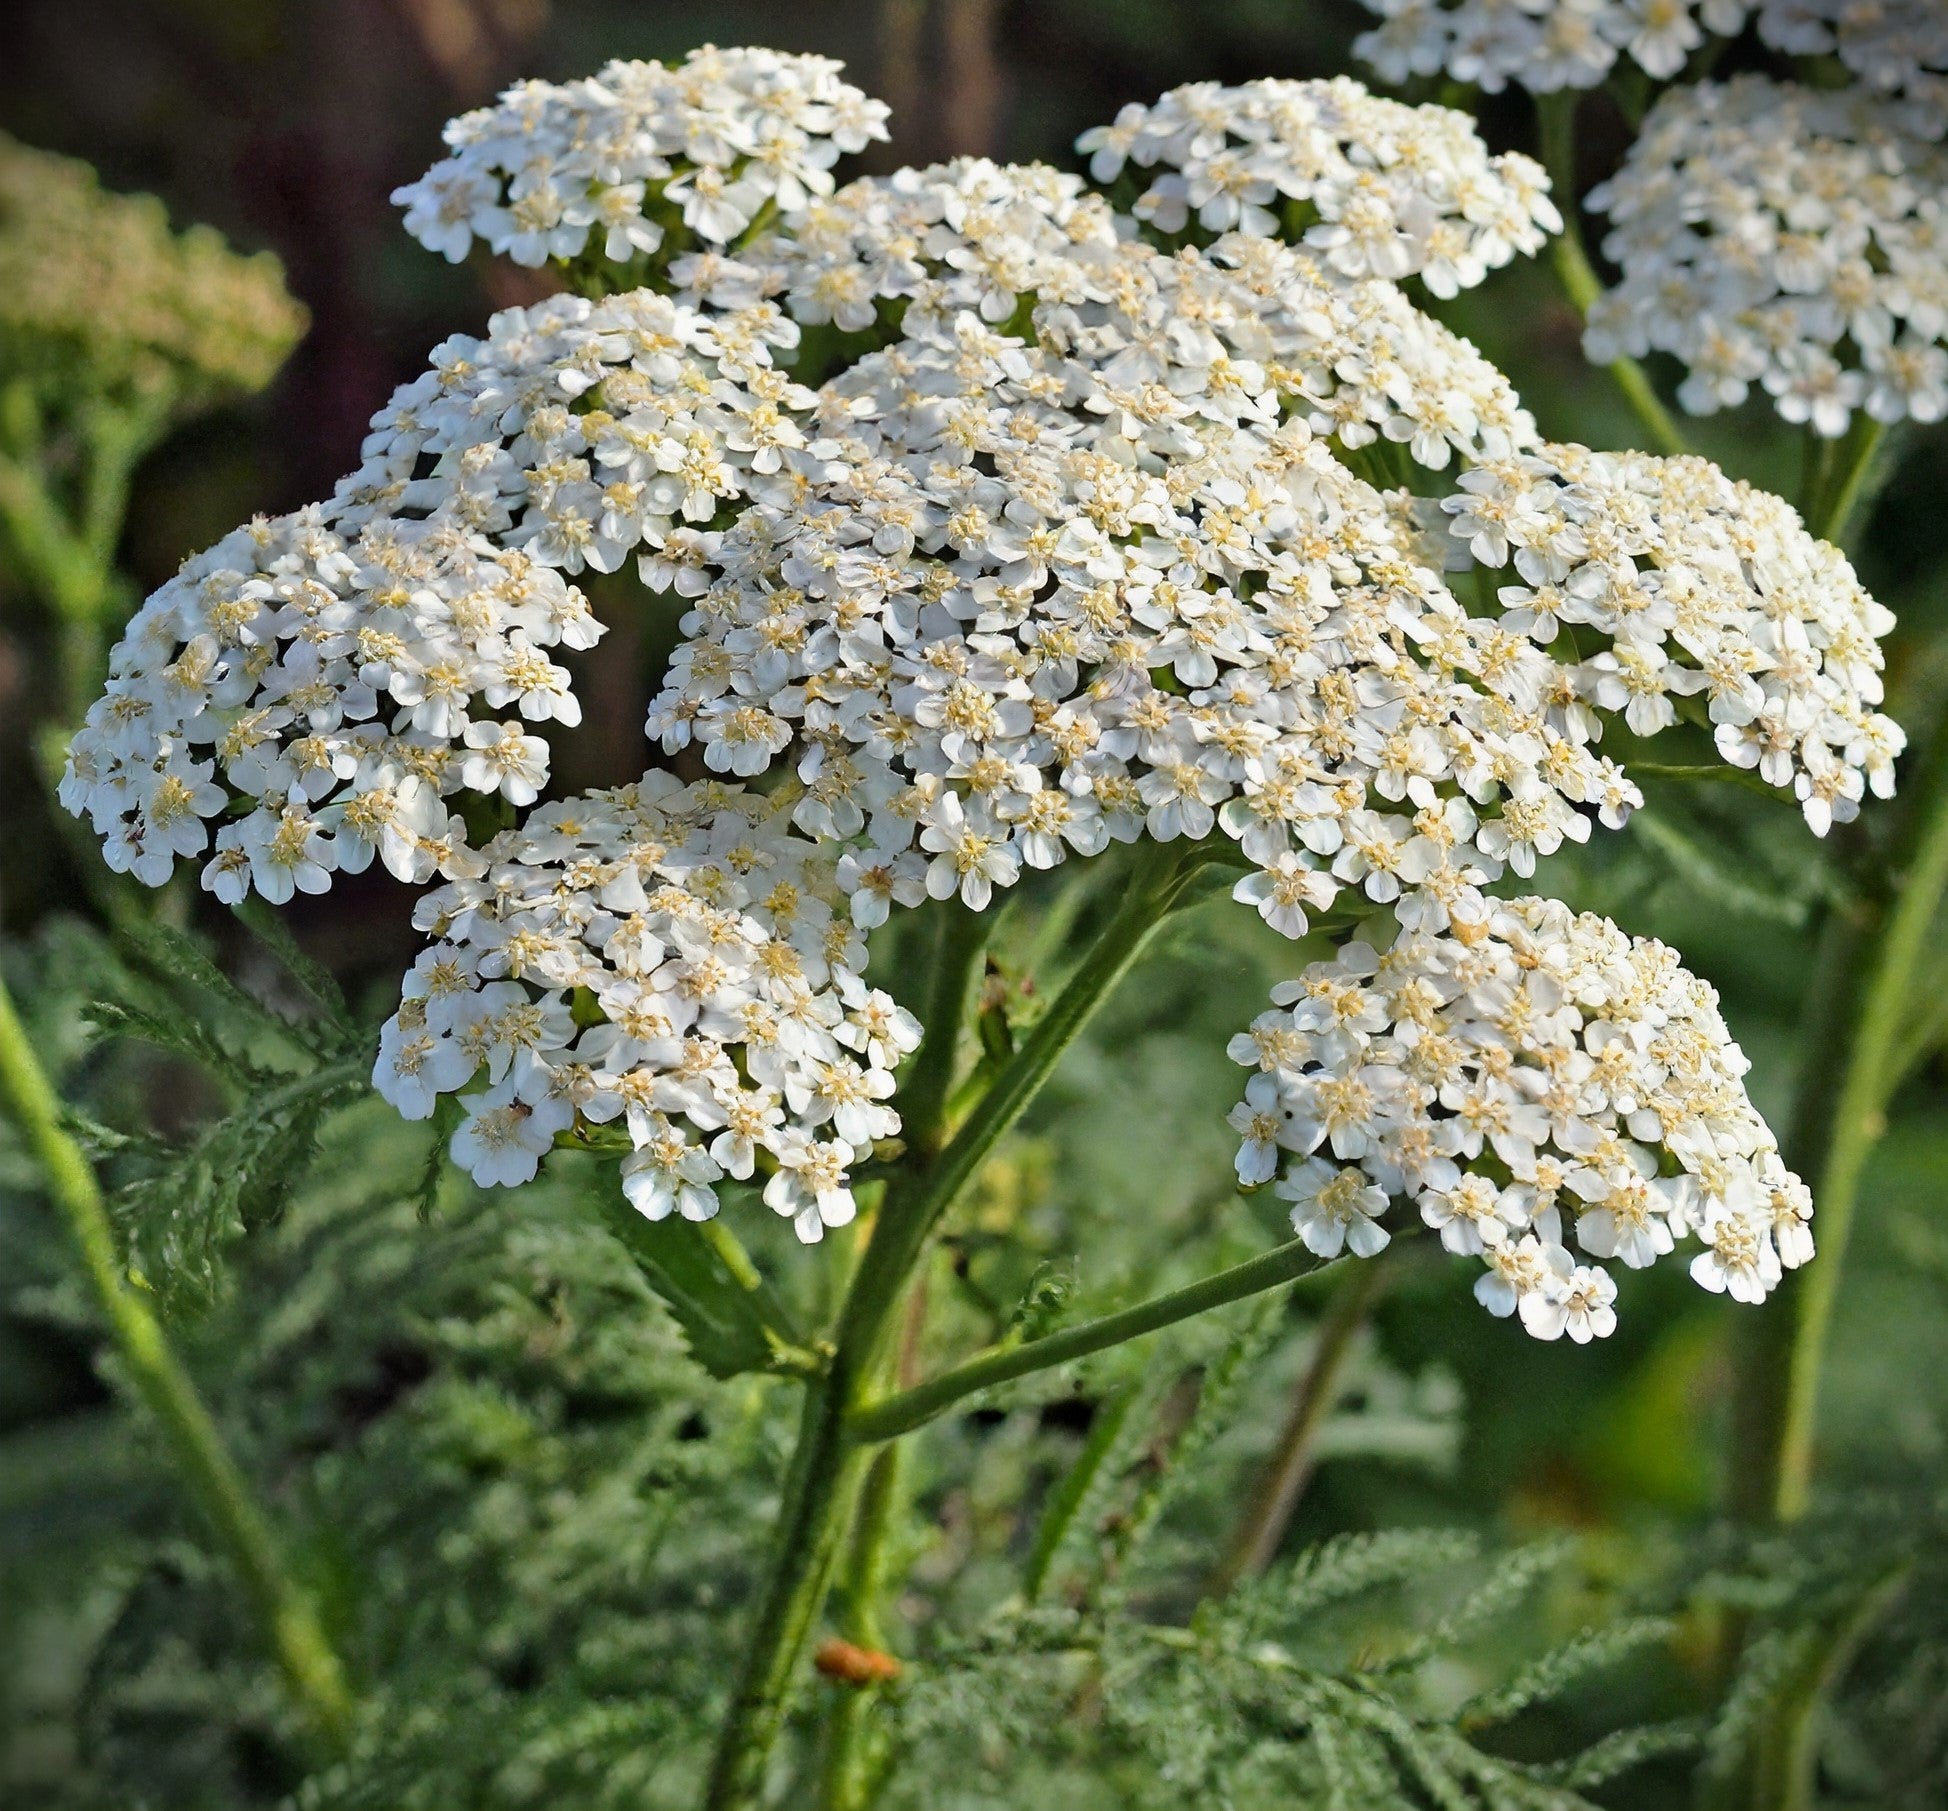 What can yarrow tea be used for?